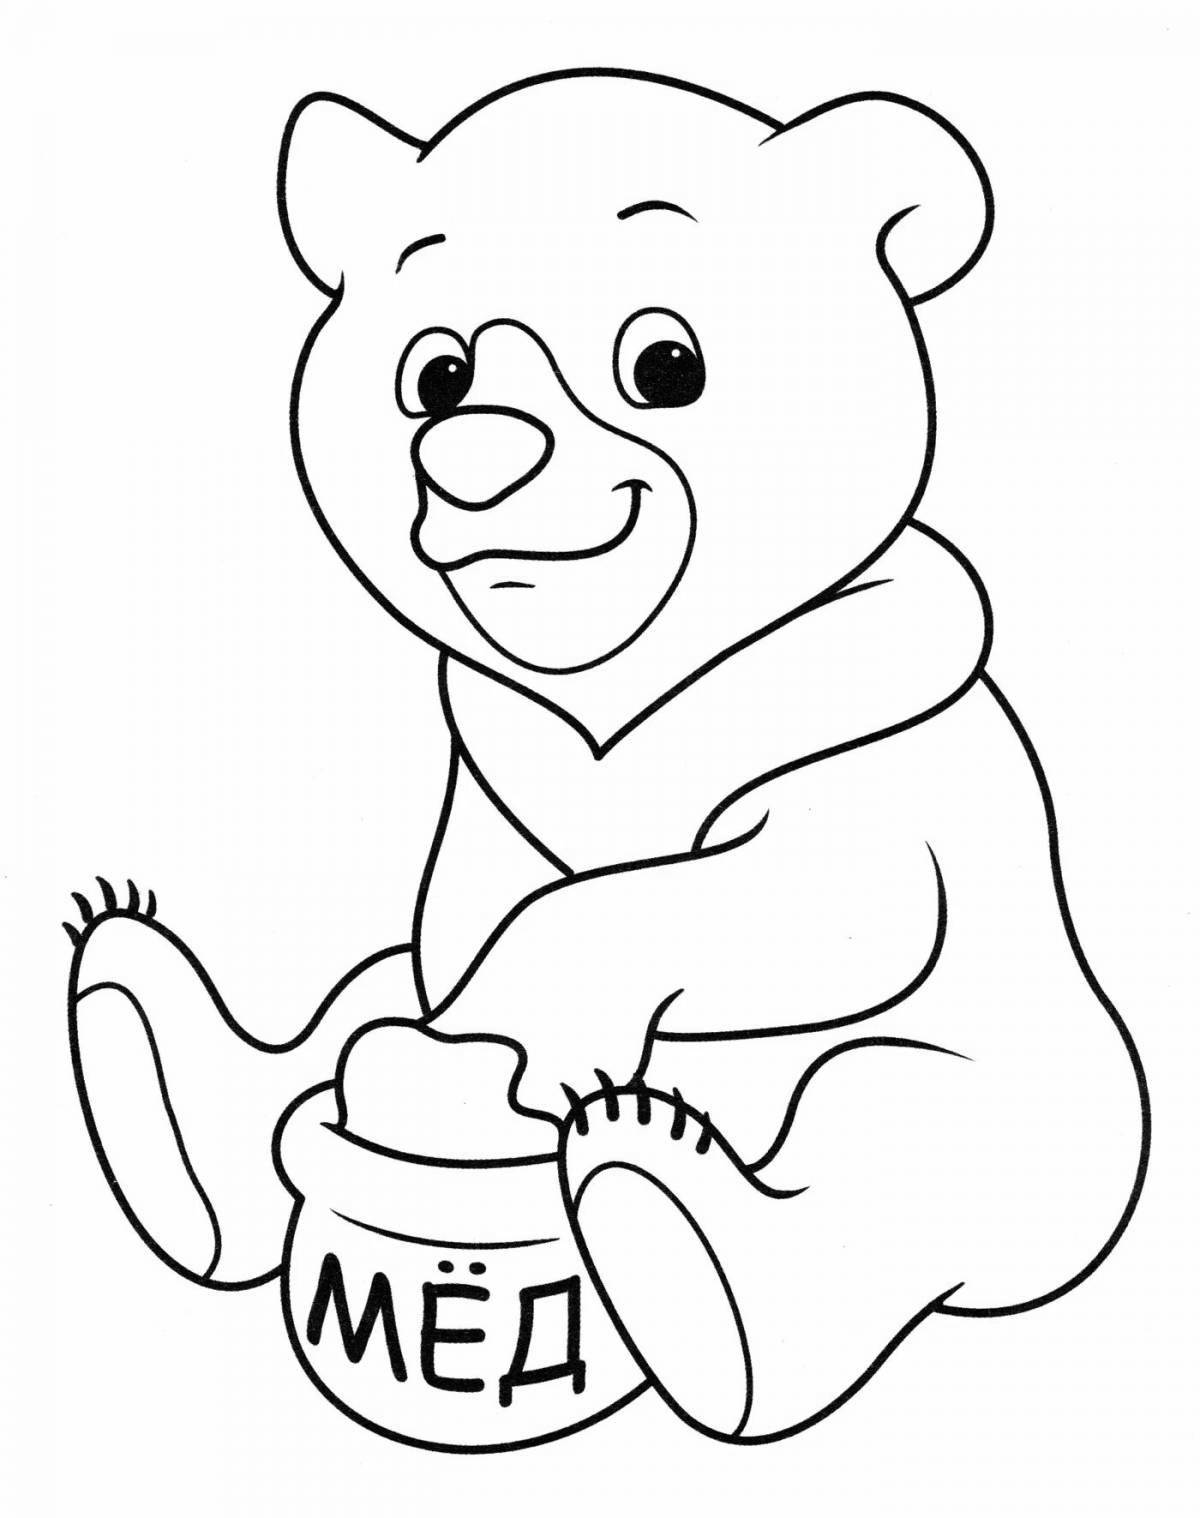 Charming clumsy bear coloring book